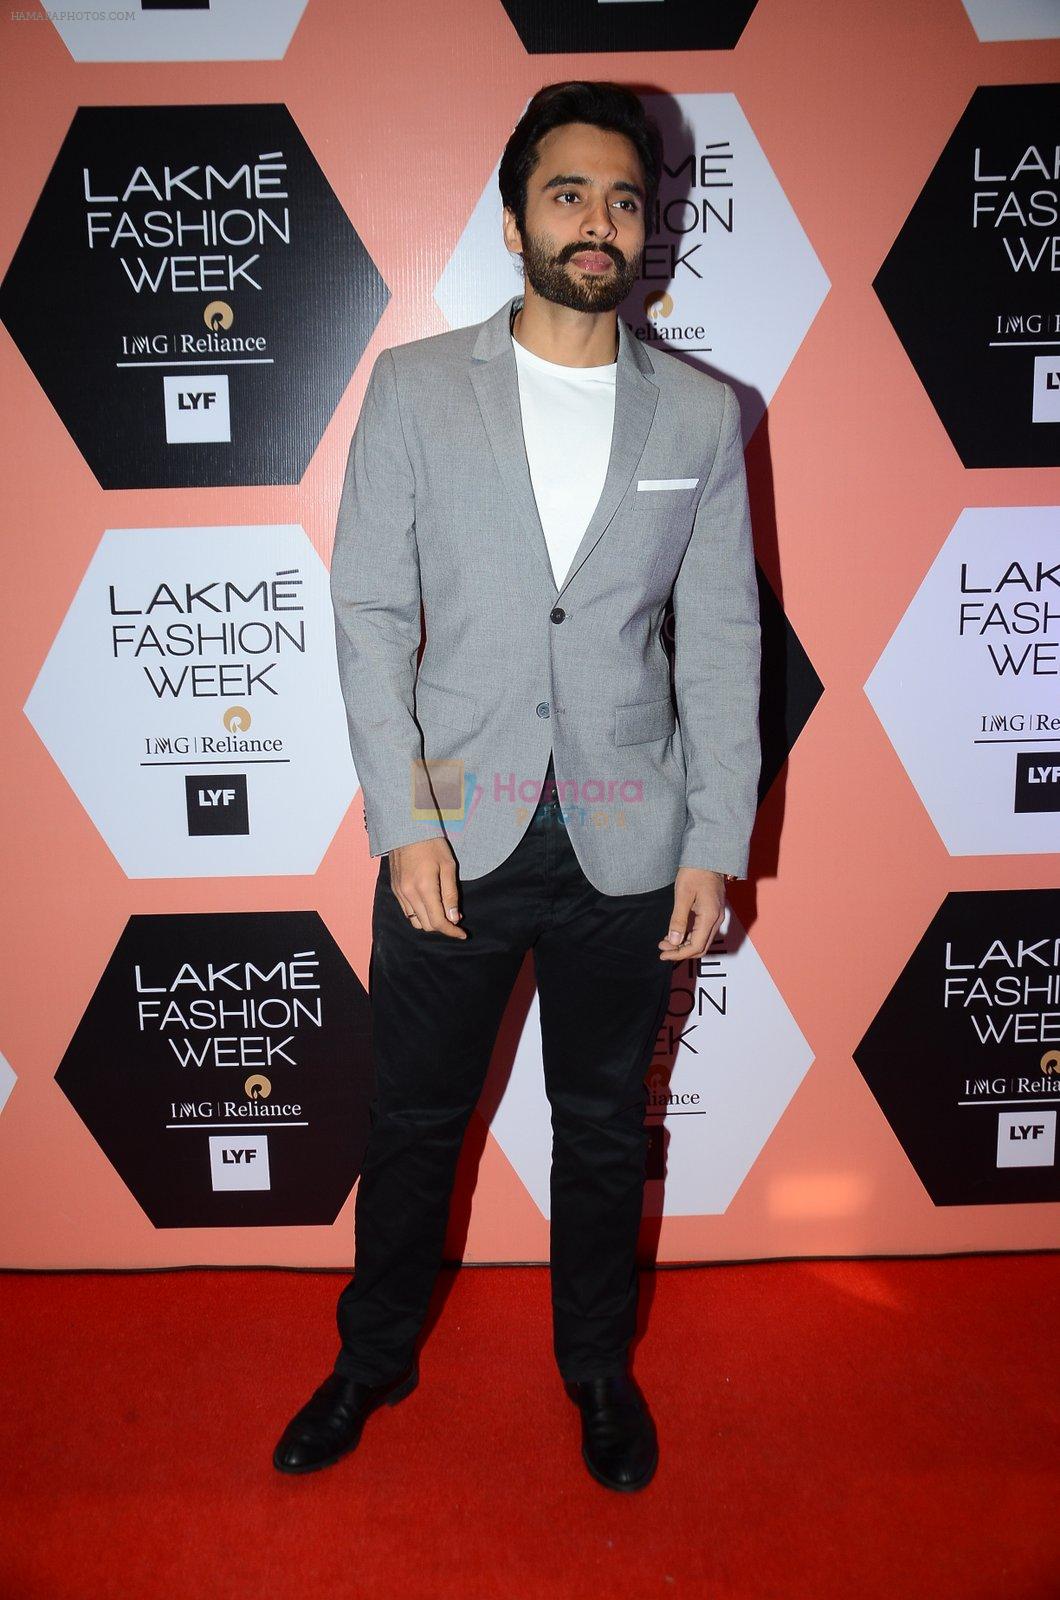 Jackky Bhagnani on Day 4 at Lakme Fashion Week 2016 on 2nd April 2016